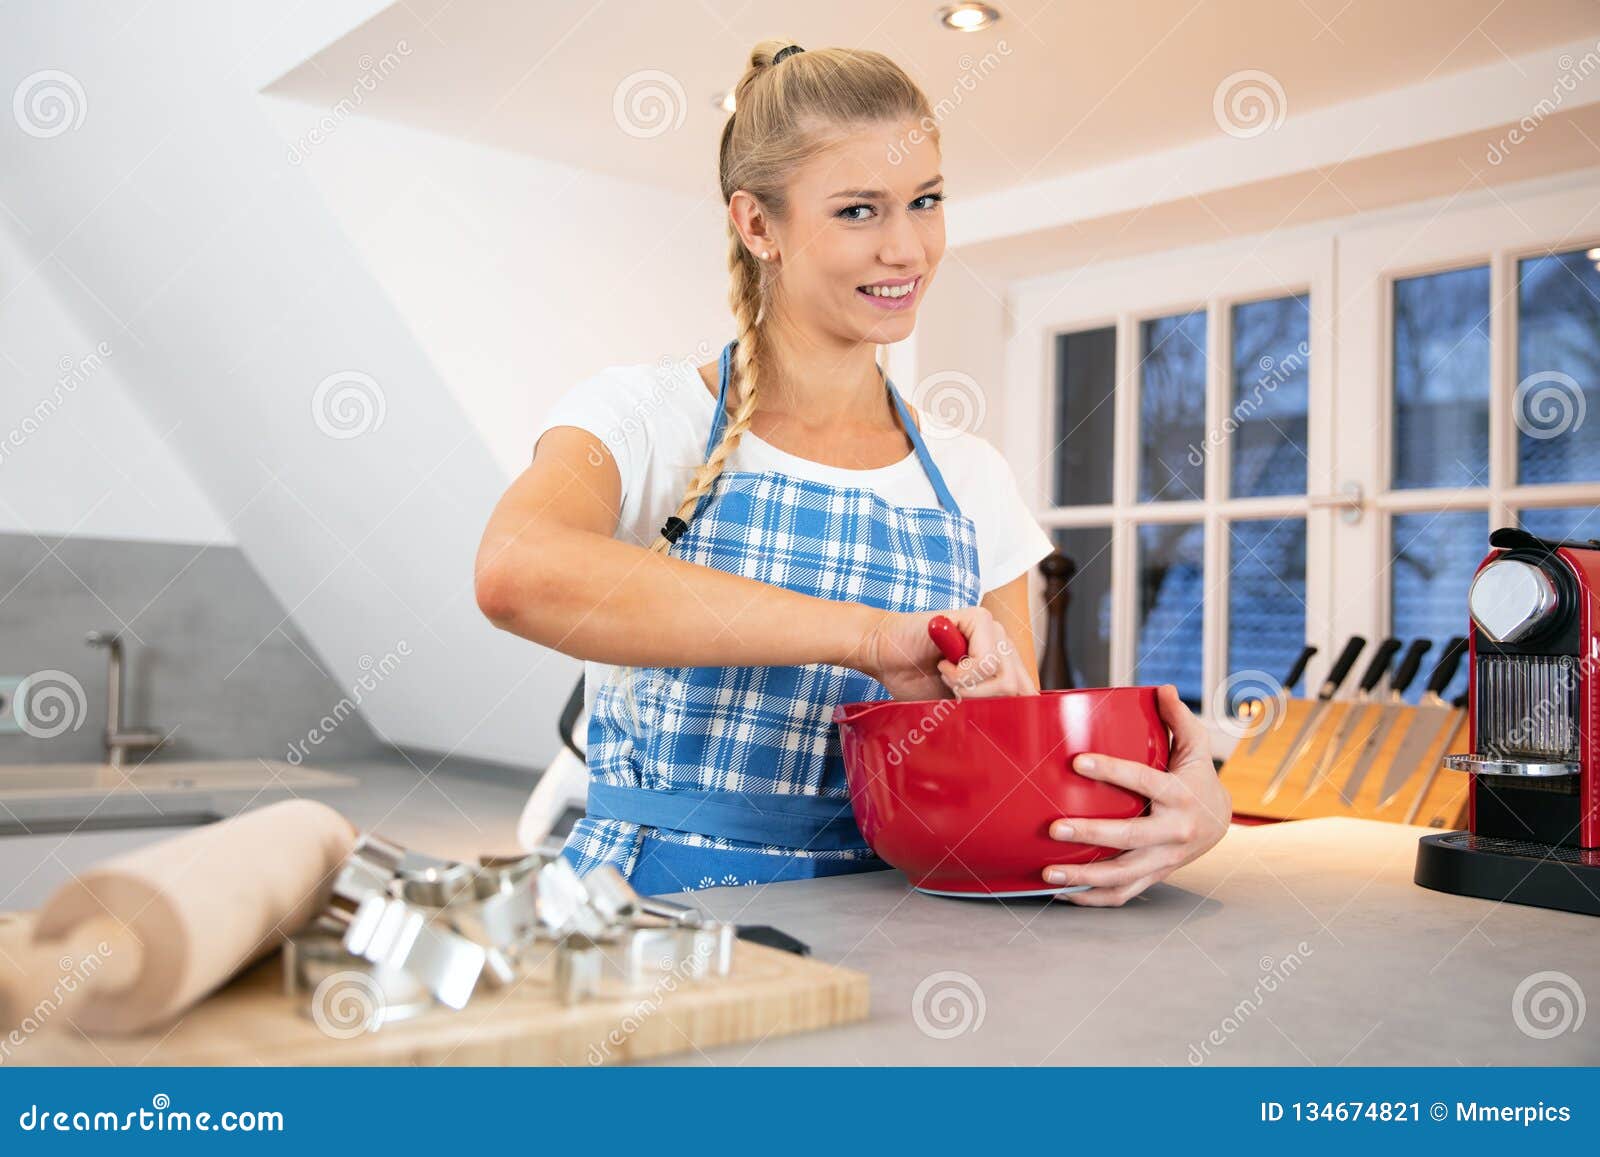 woman baking in the kitchen christmas